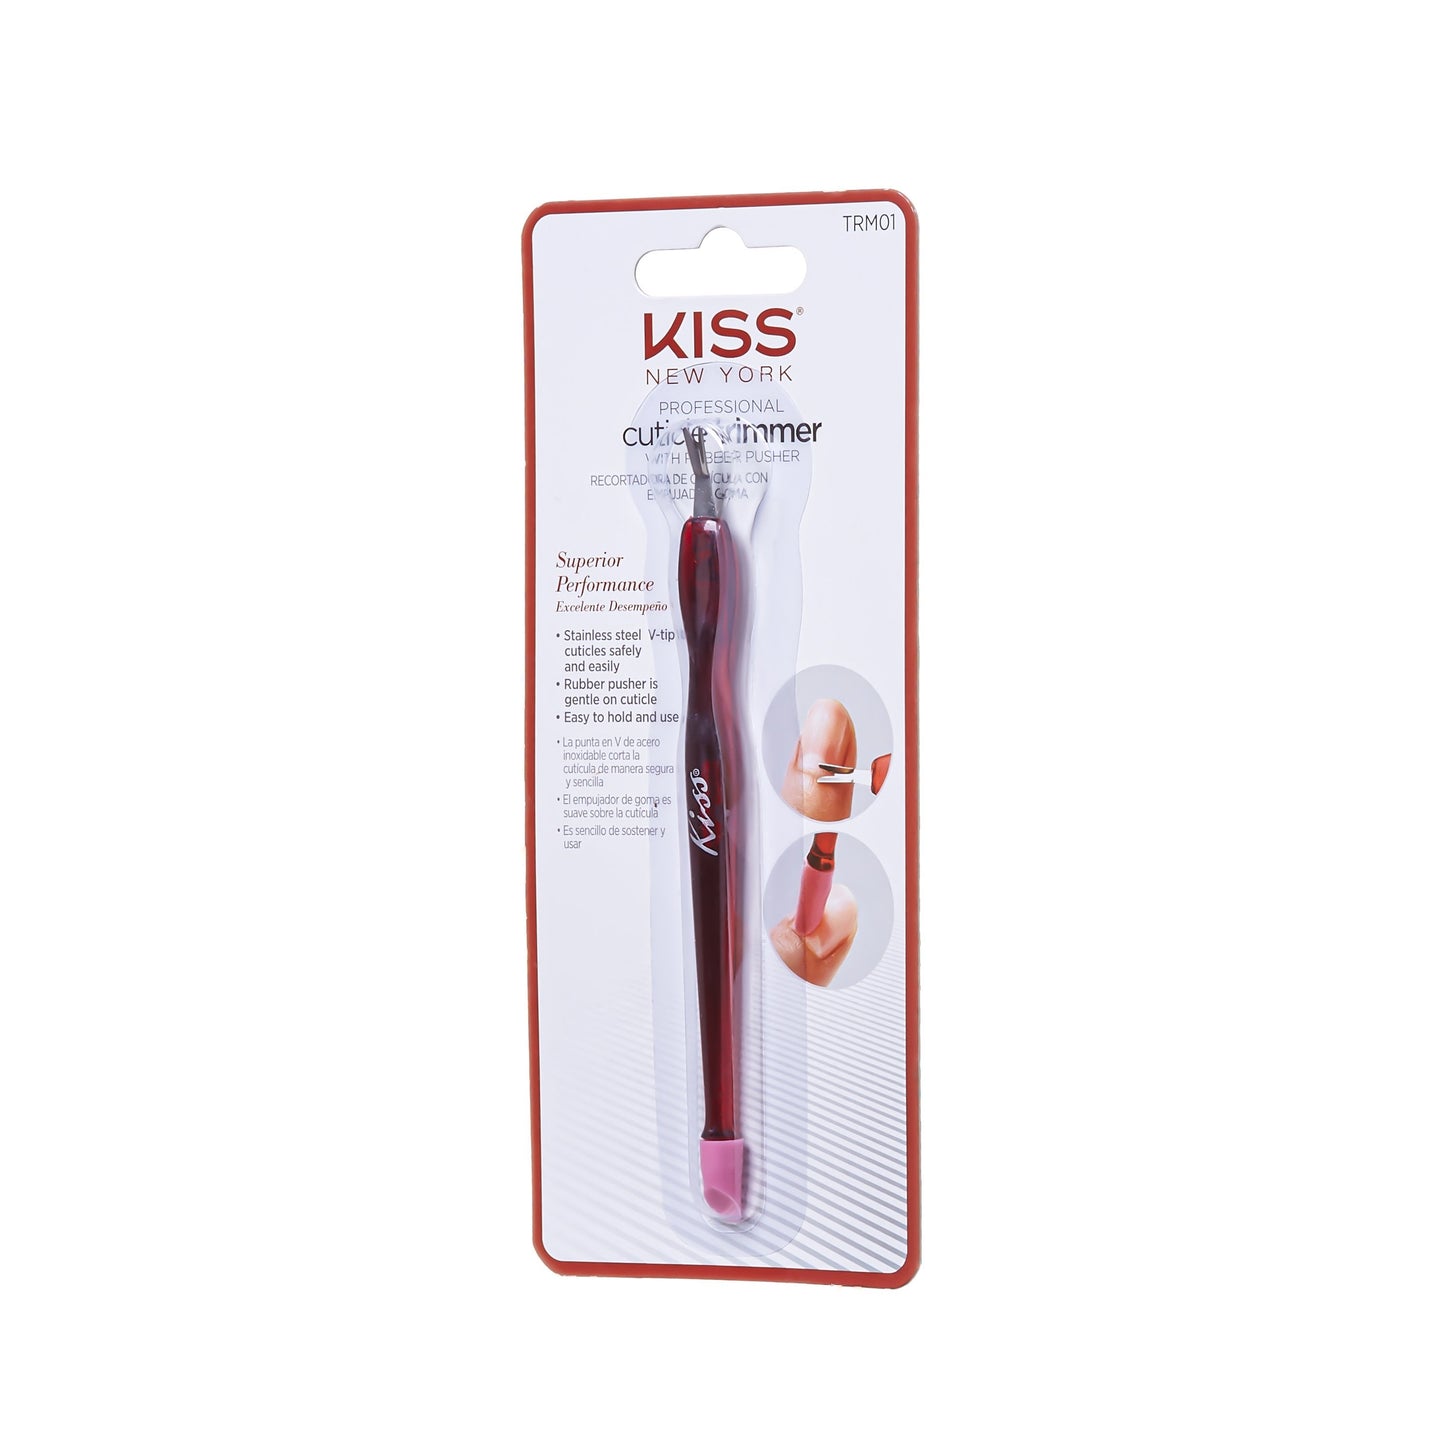 Cuticle Trimmer (TRM01)